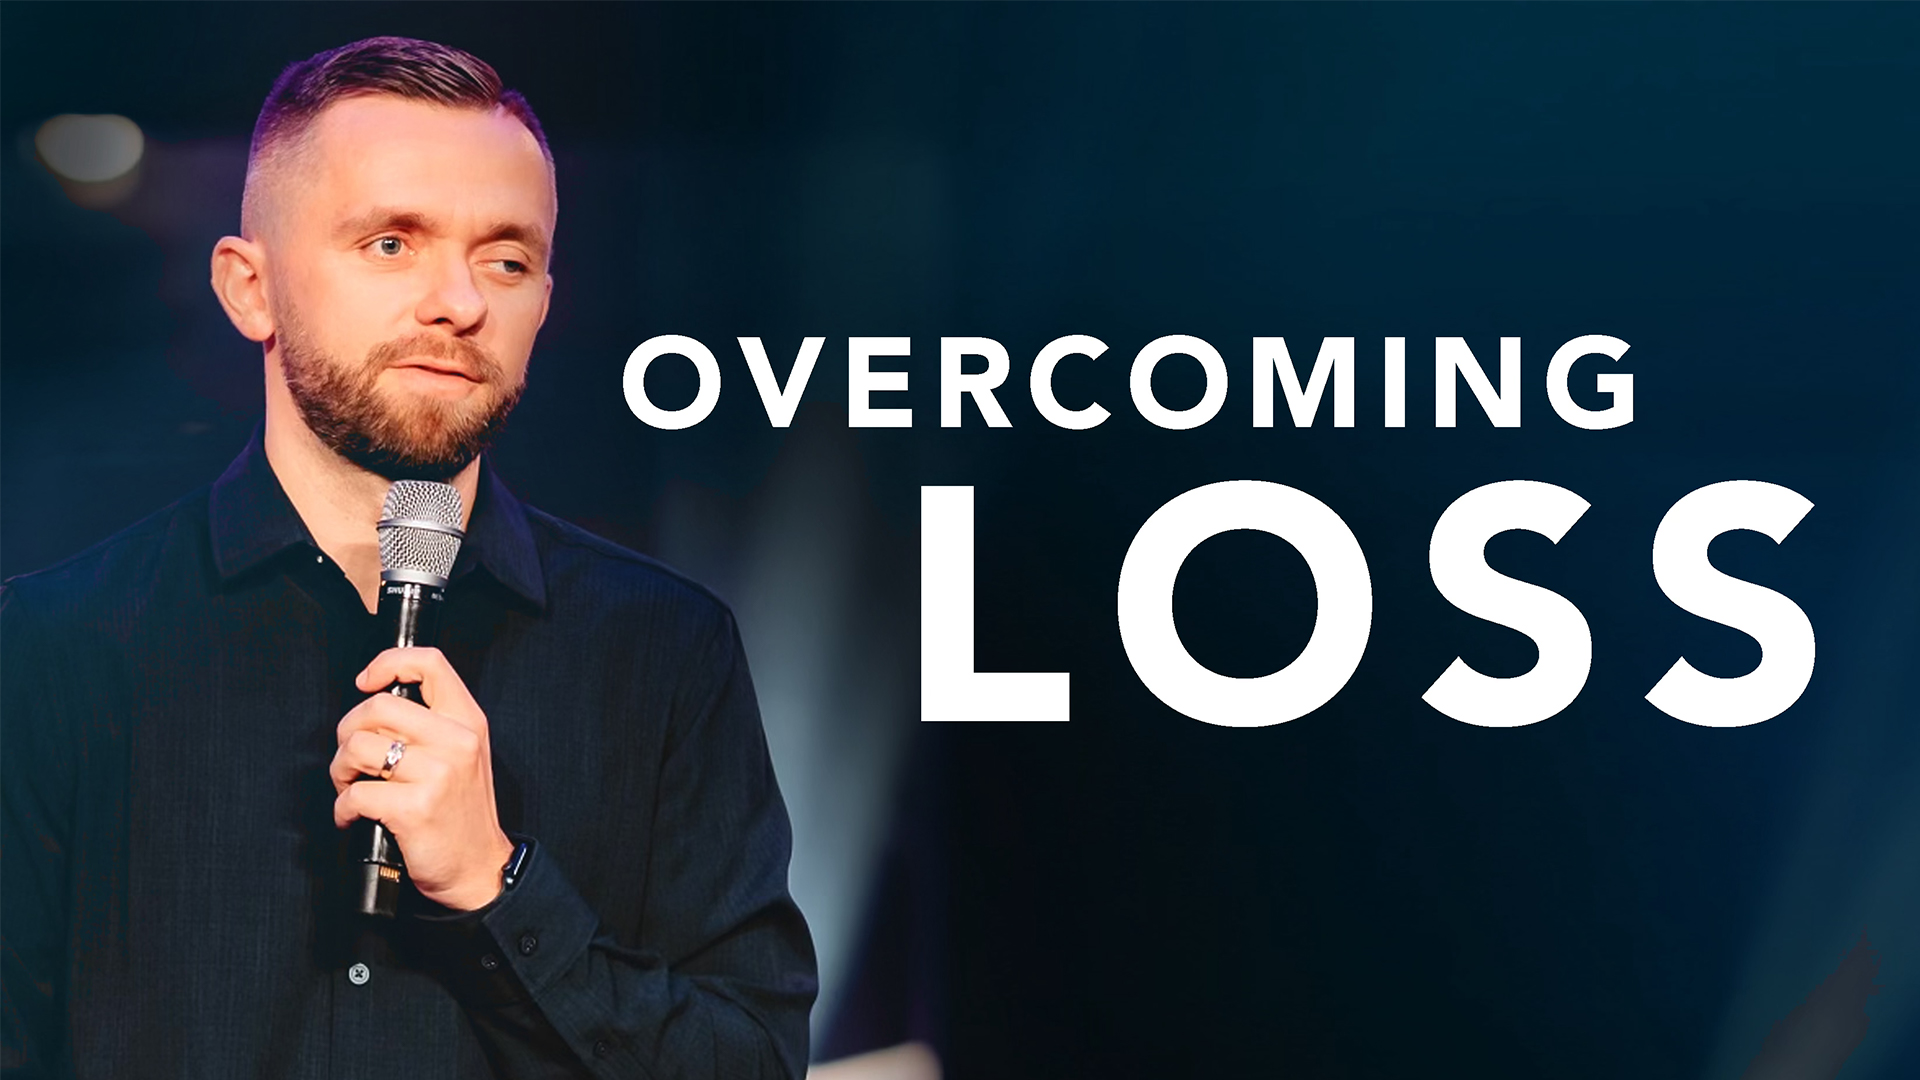 Featured image for “Overcoming Loss”